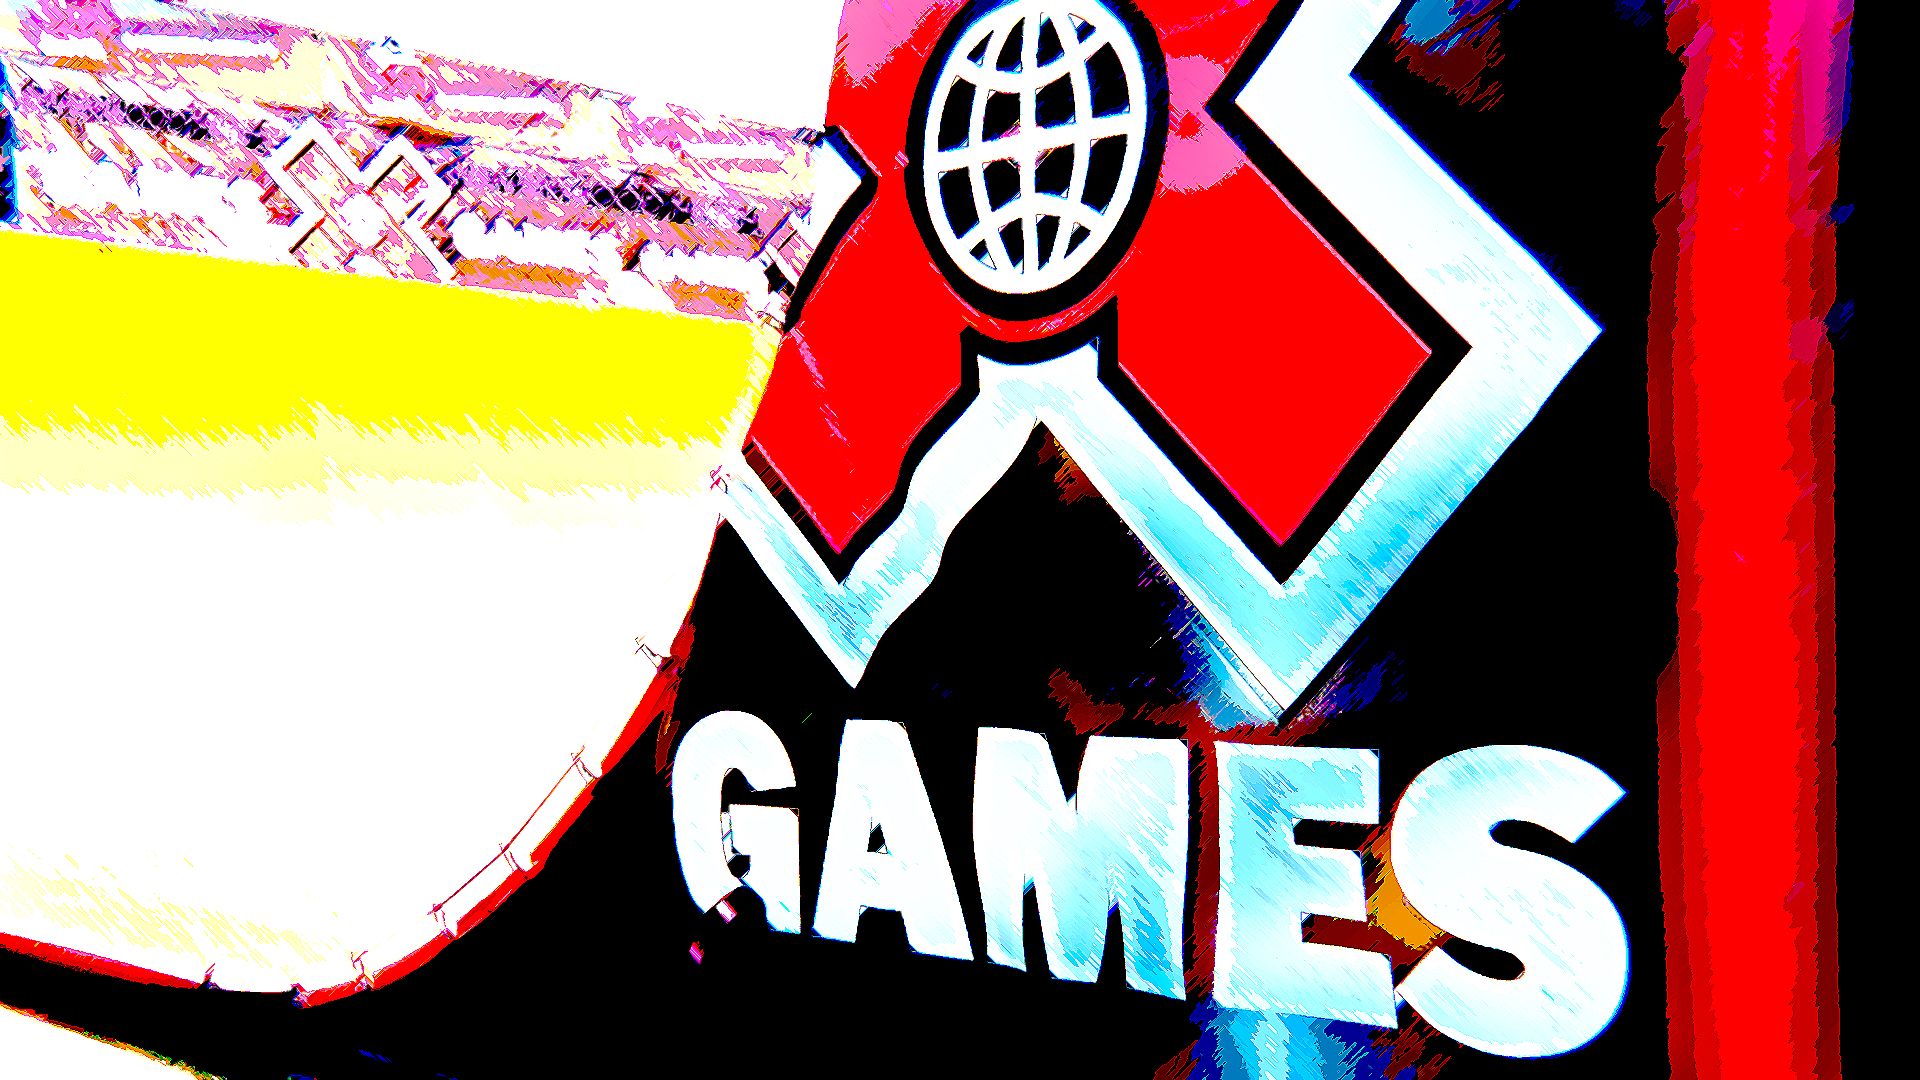 Play games x хьюстон. X games. Xgame. X-game НН. Wallpaper Posted by Foster Robert.